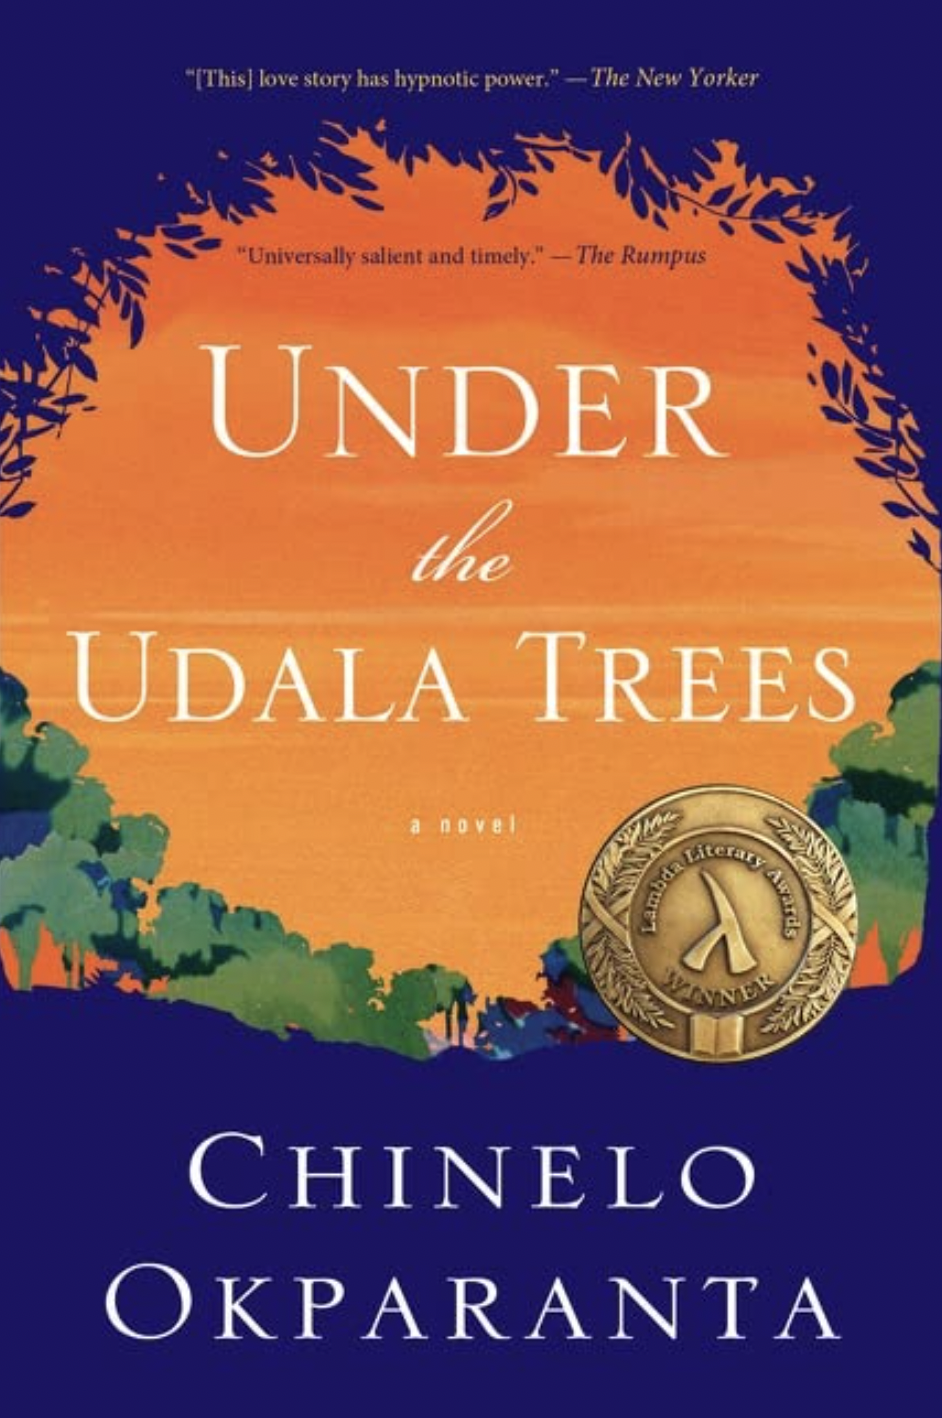 Book cover of Under the Udala Trees by Chinelo Okparanta